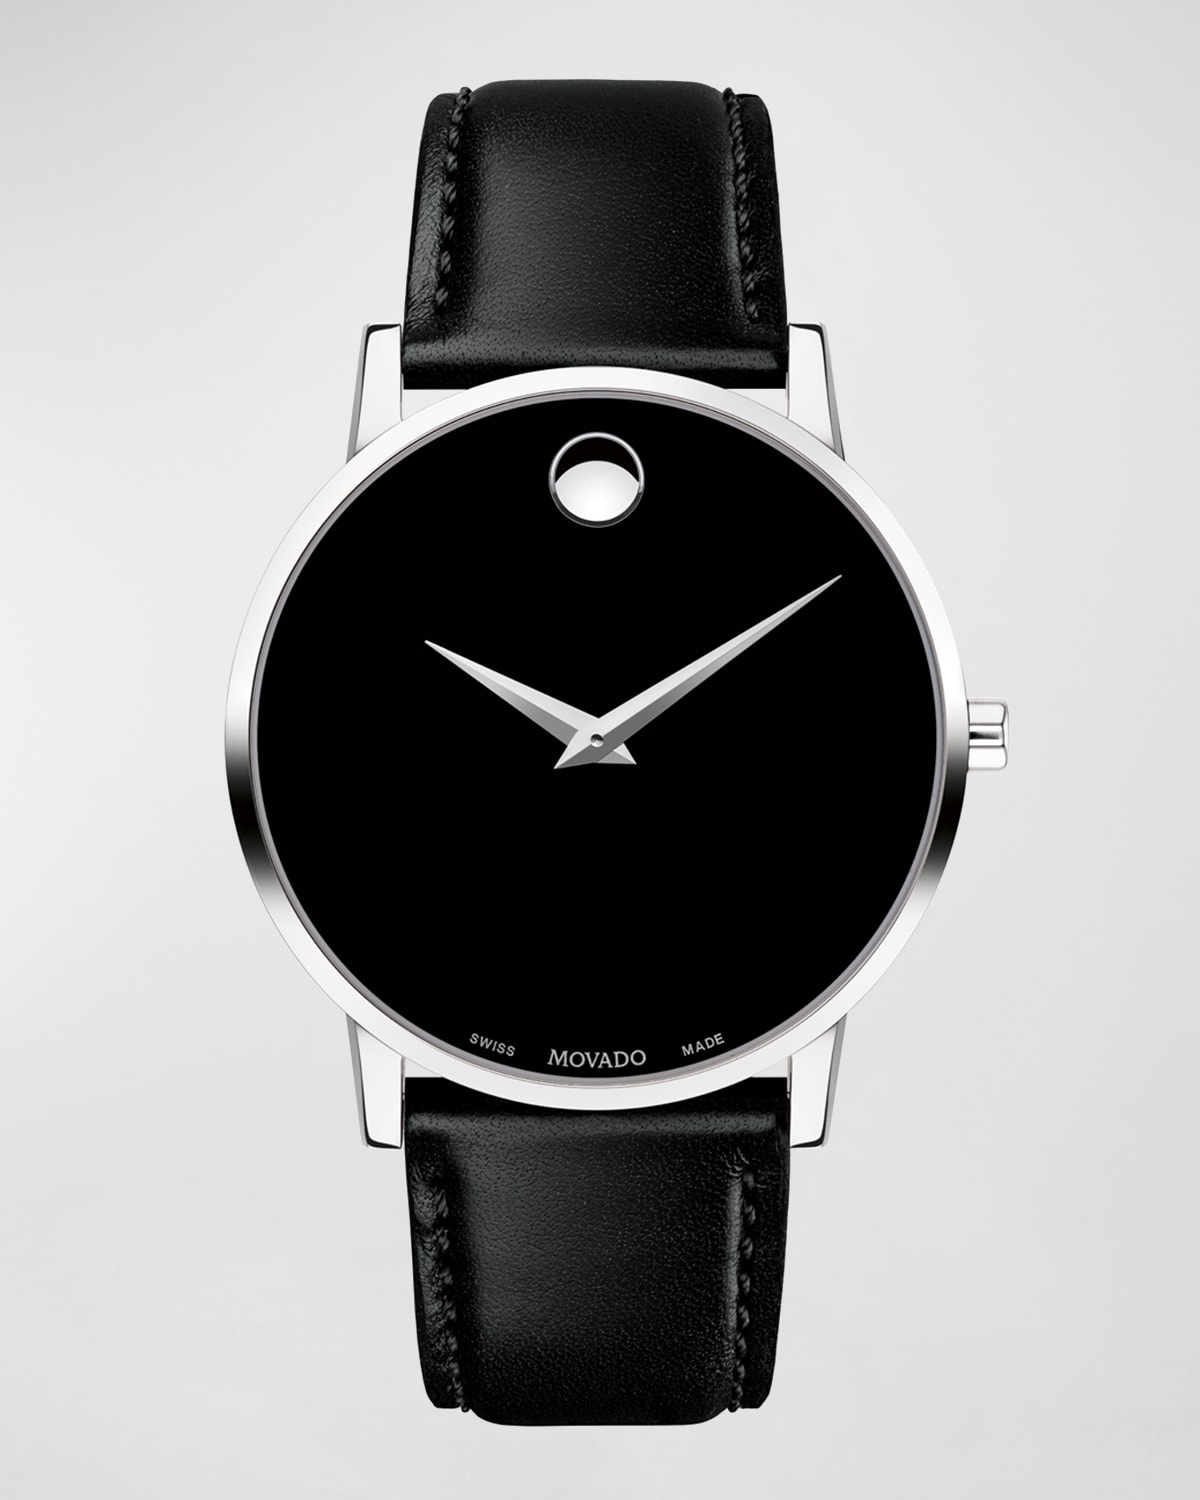 Men's 40mm Ultra Slim Watch with Leather Strap Black Museum Dial